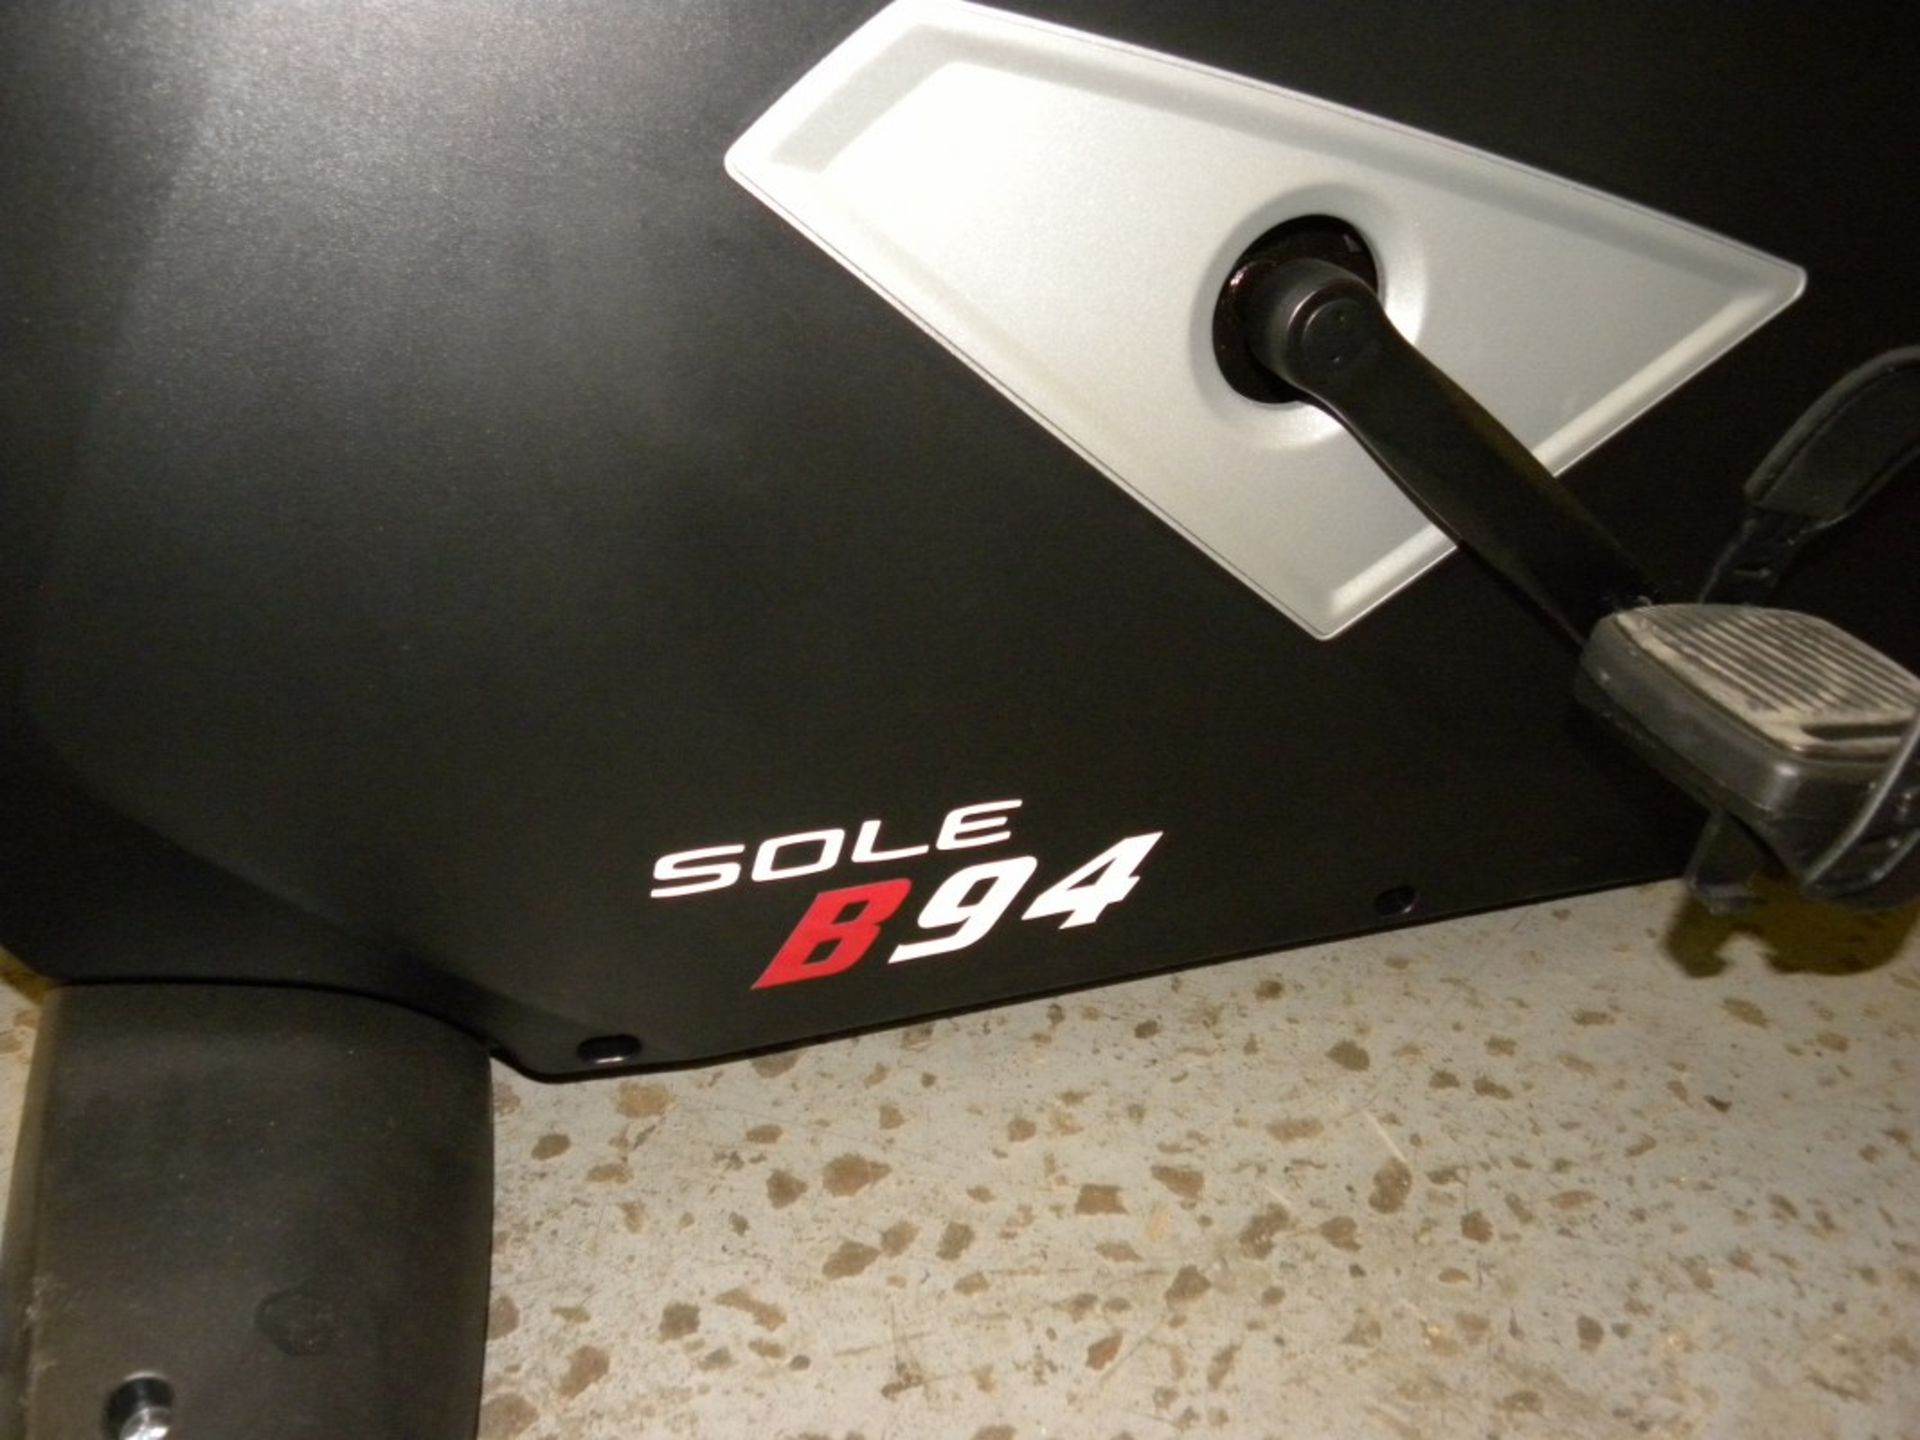 SOLE B94 UPRIGHT CYCLE - Image 3 of 3